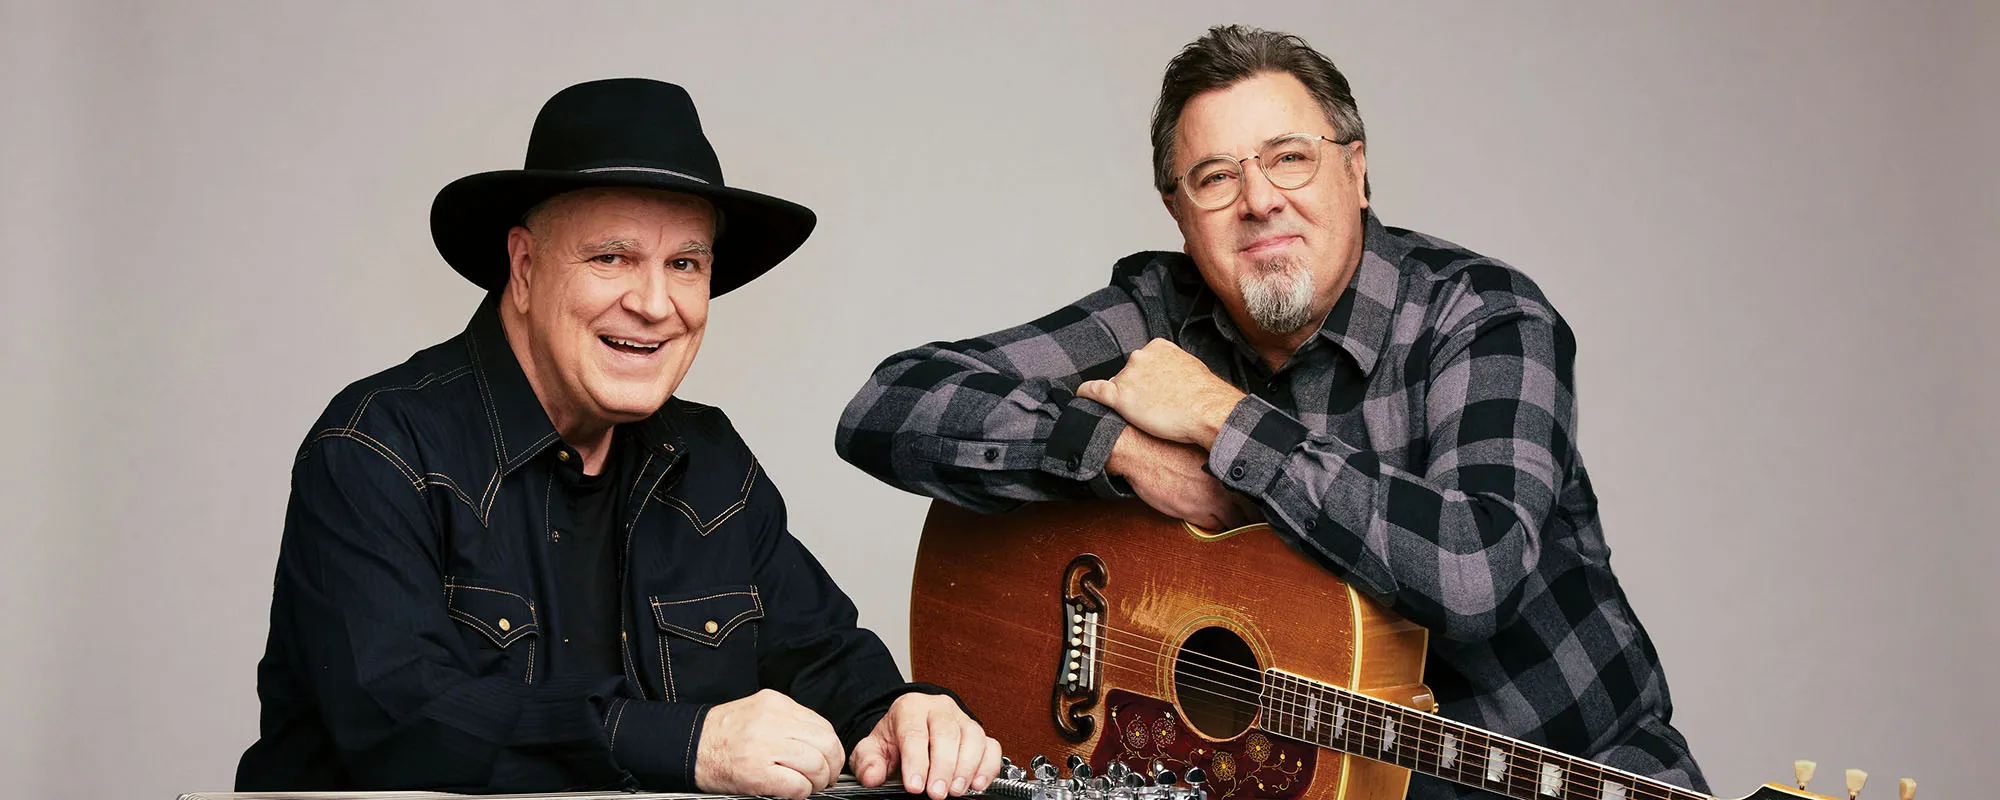 Vince Gill and Paul Franklin Talk Ray Price Tribute Album